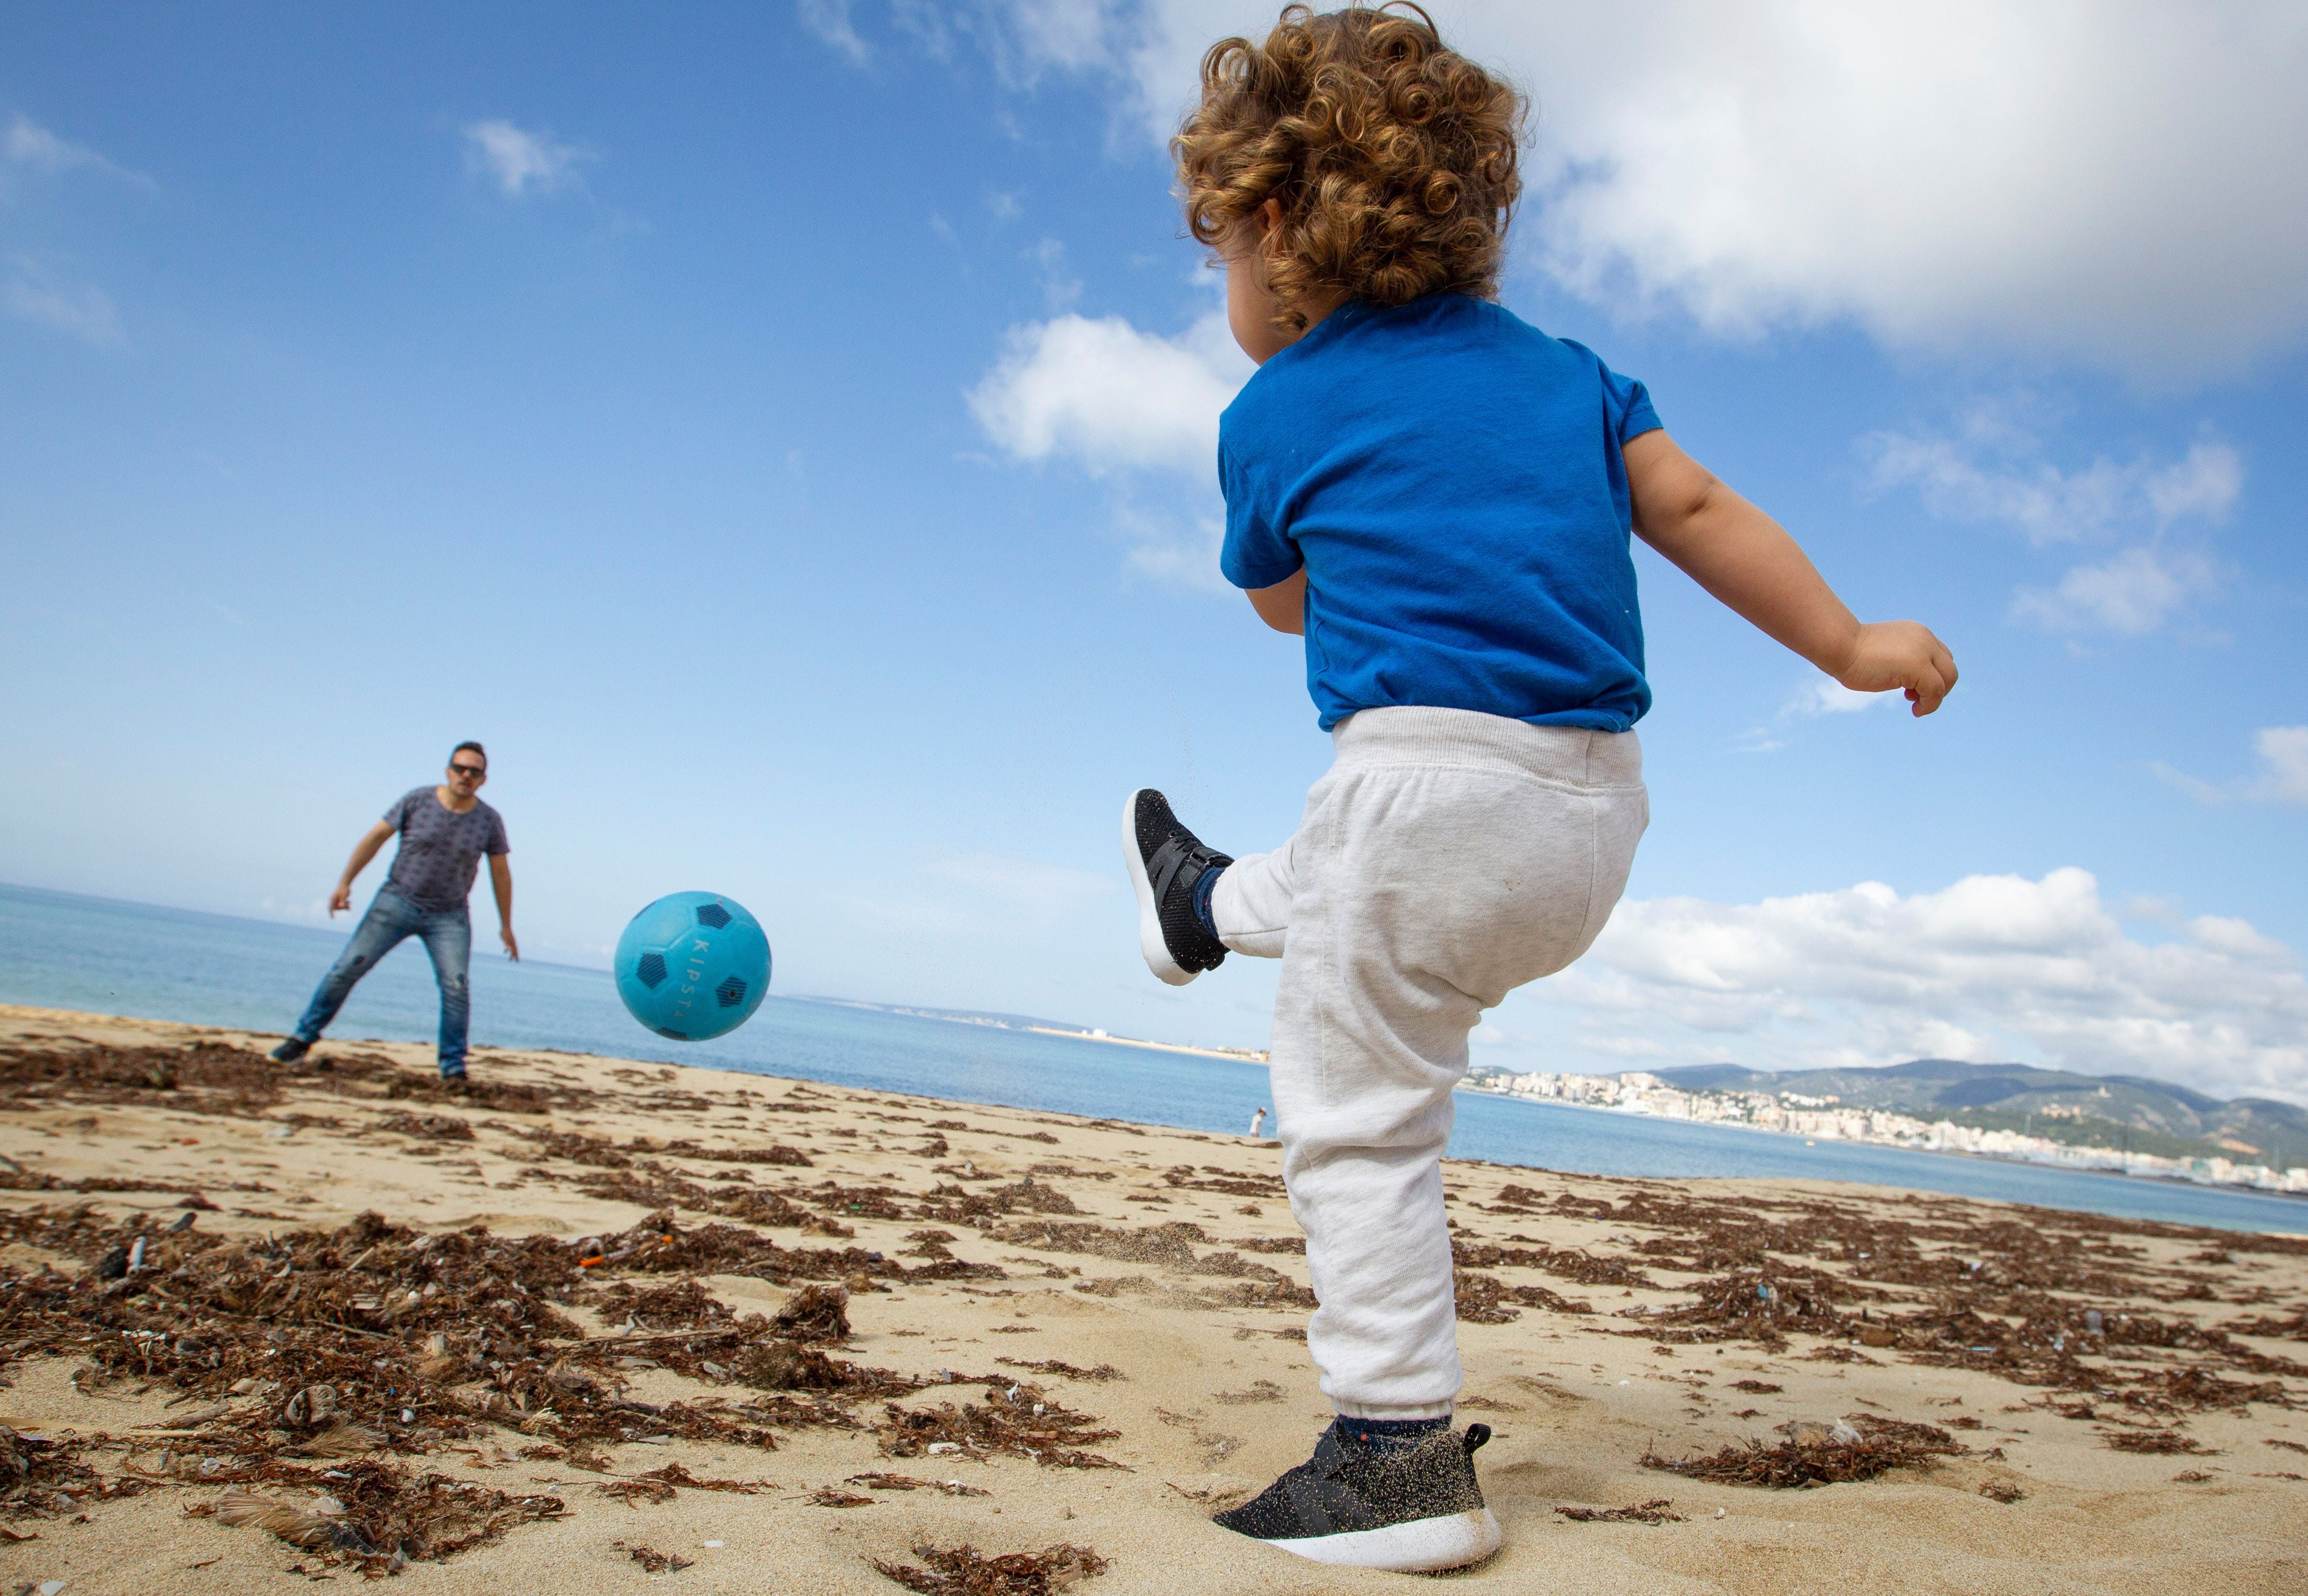 The poll revealed that children want to spend more play time with their parents